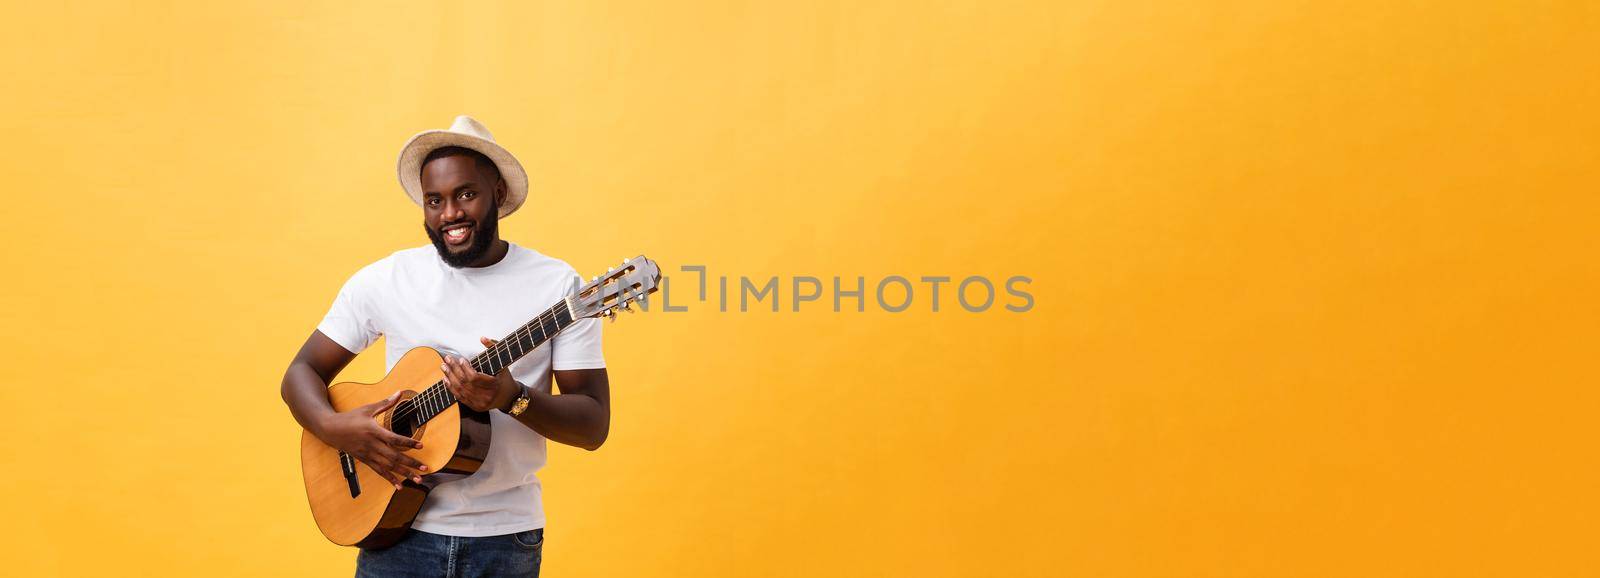 Muscular black man playing guitar, wearing jeans and white tank-top. Isolate over yellow background